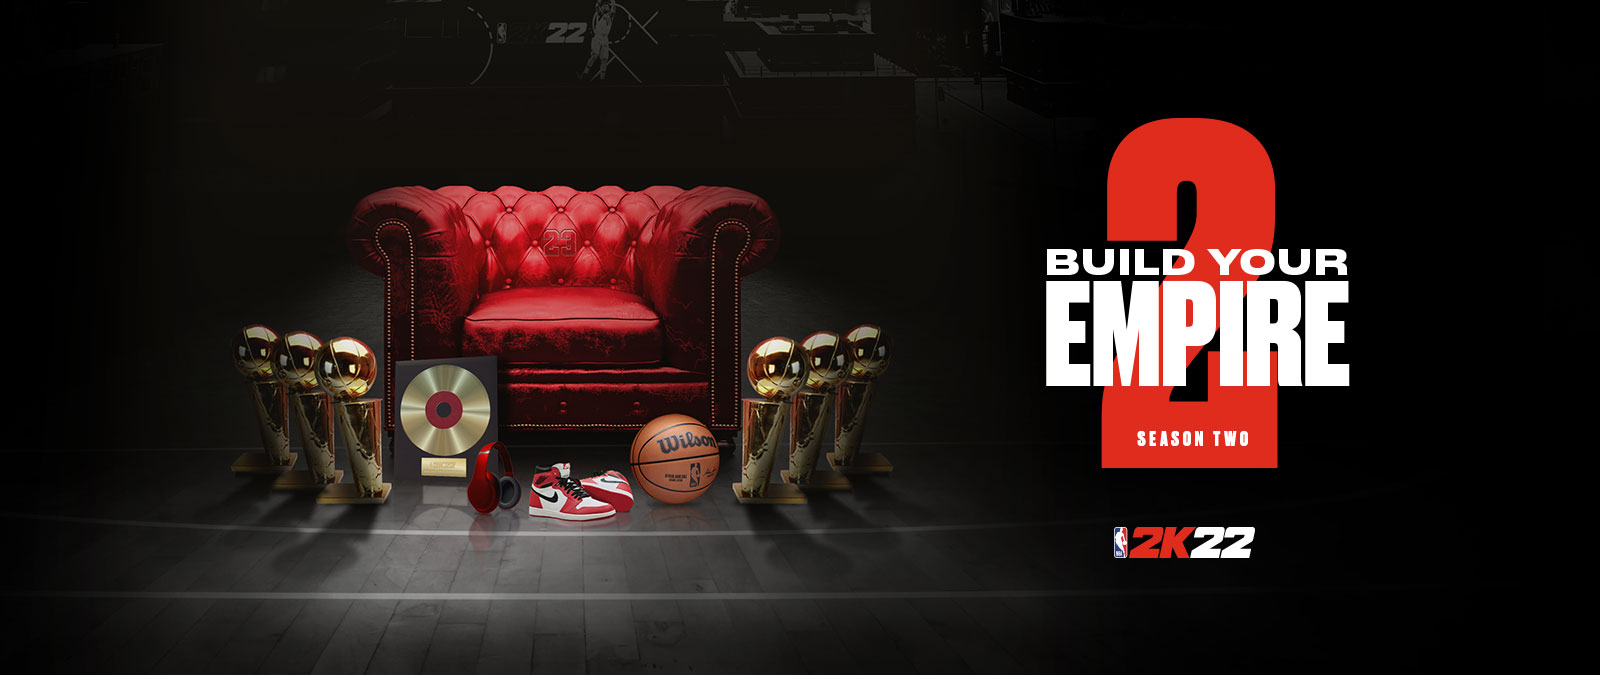 Build your empire in season 2 of NBA 2k22: Several trophies sitting around a red leather chair.